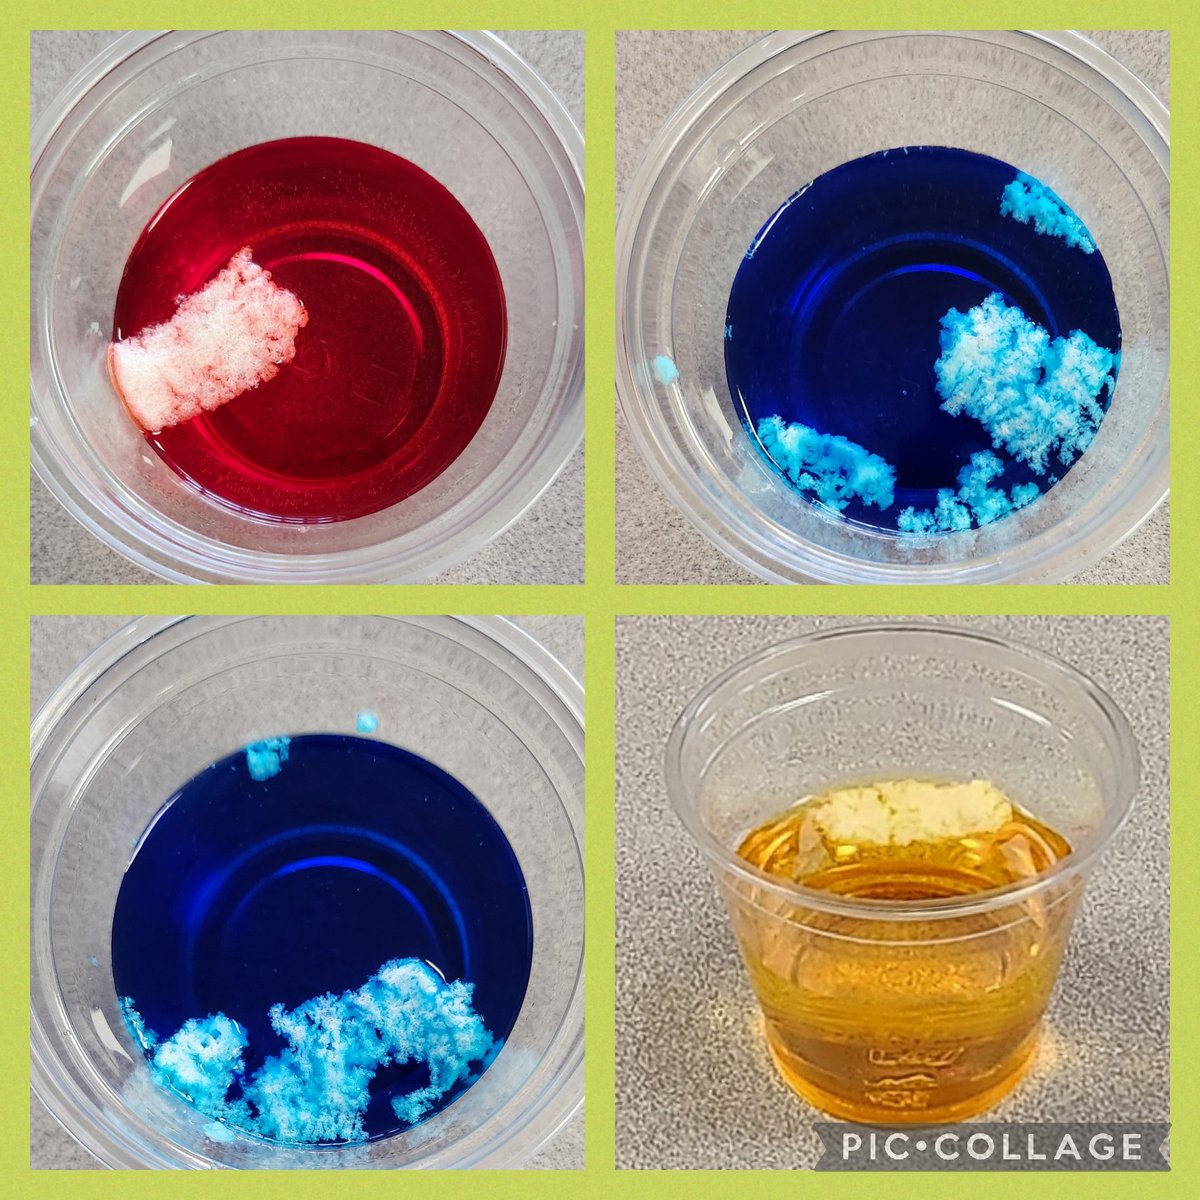 Did experiment with each class. Pictures taken at end of day. Red was first hour and held up the best. Blue disintegrated before end of classes. Yellow was last class and bet it would be like red. @dailystem thanks for the lesson idea! #STEMeducation